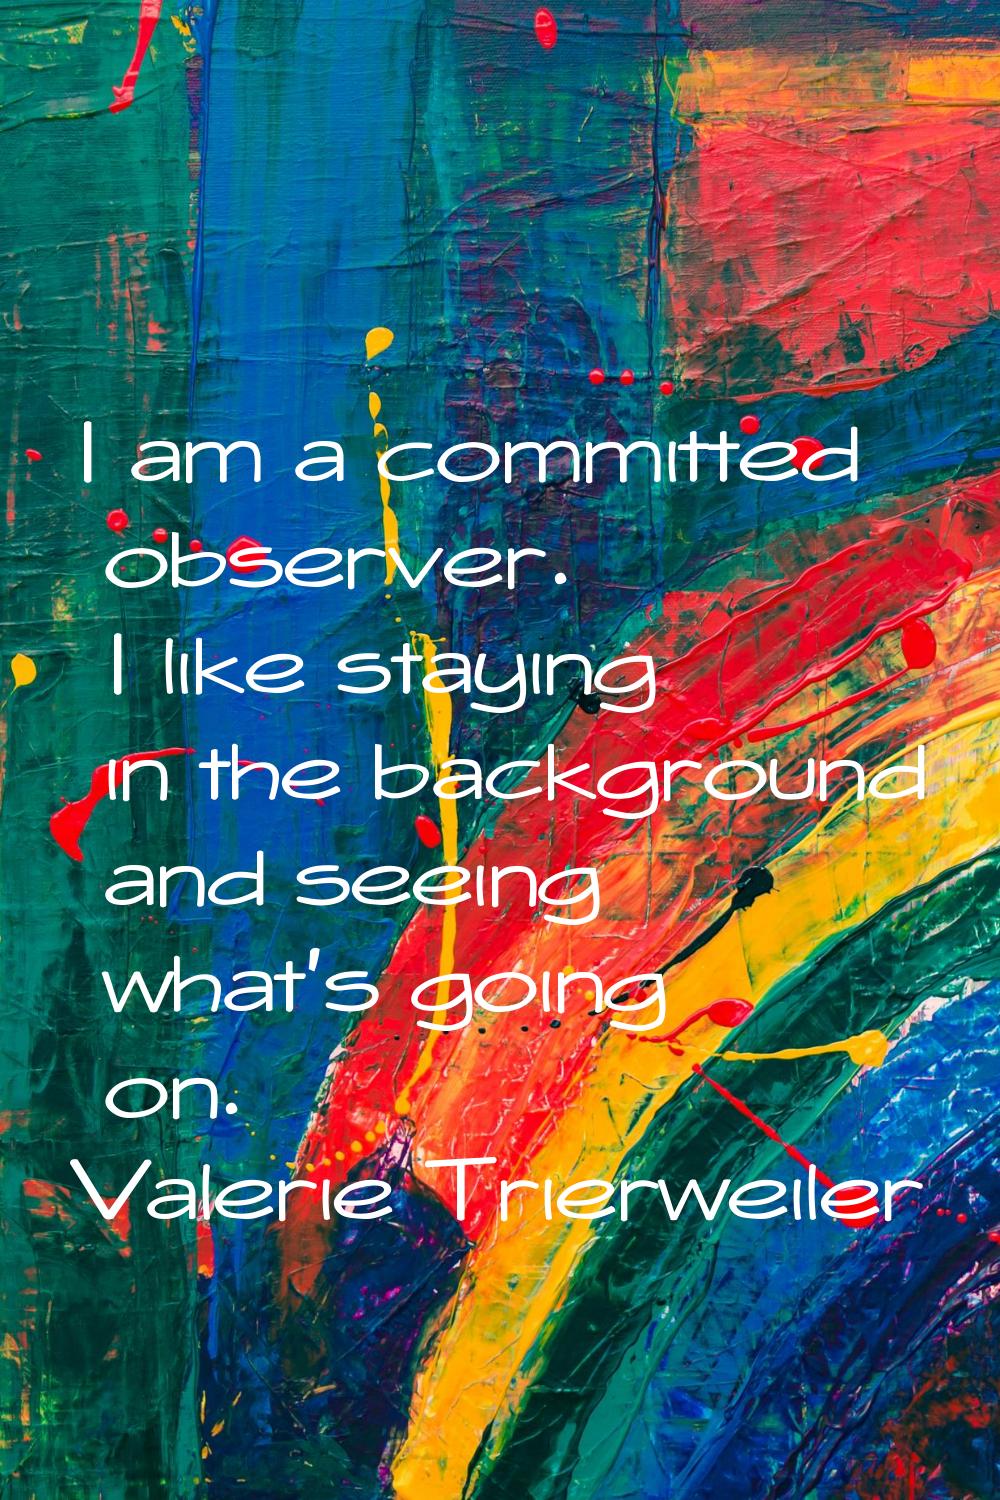 I am a committed observer. I like staying in the background and seeing what's going on.